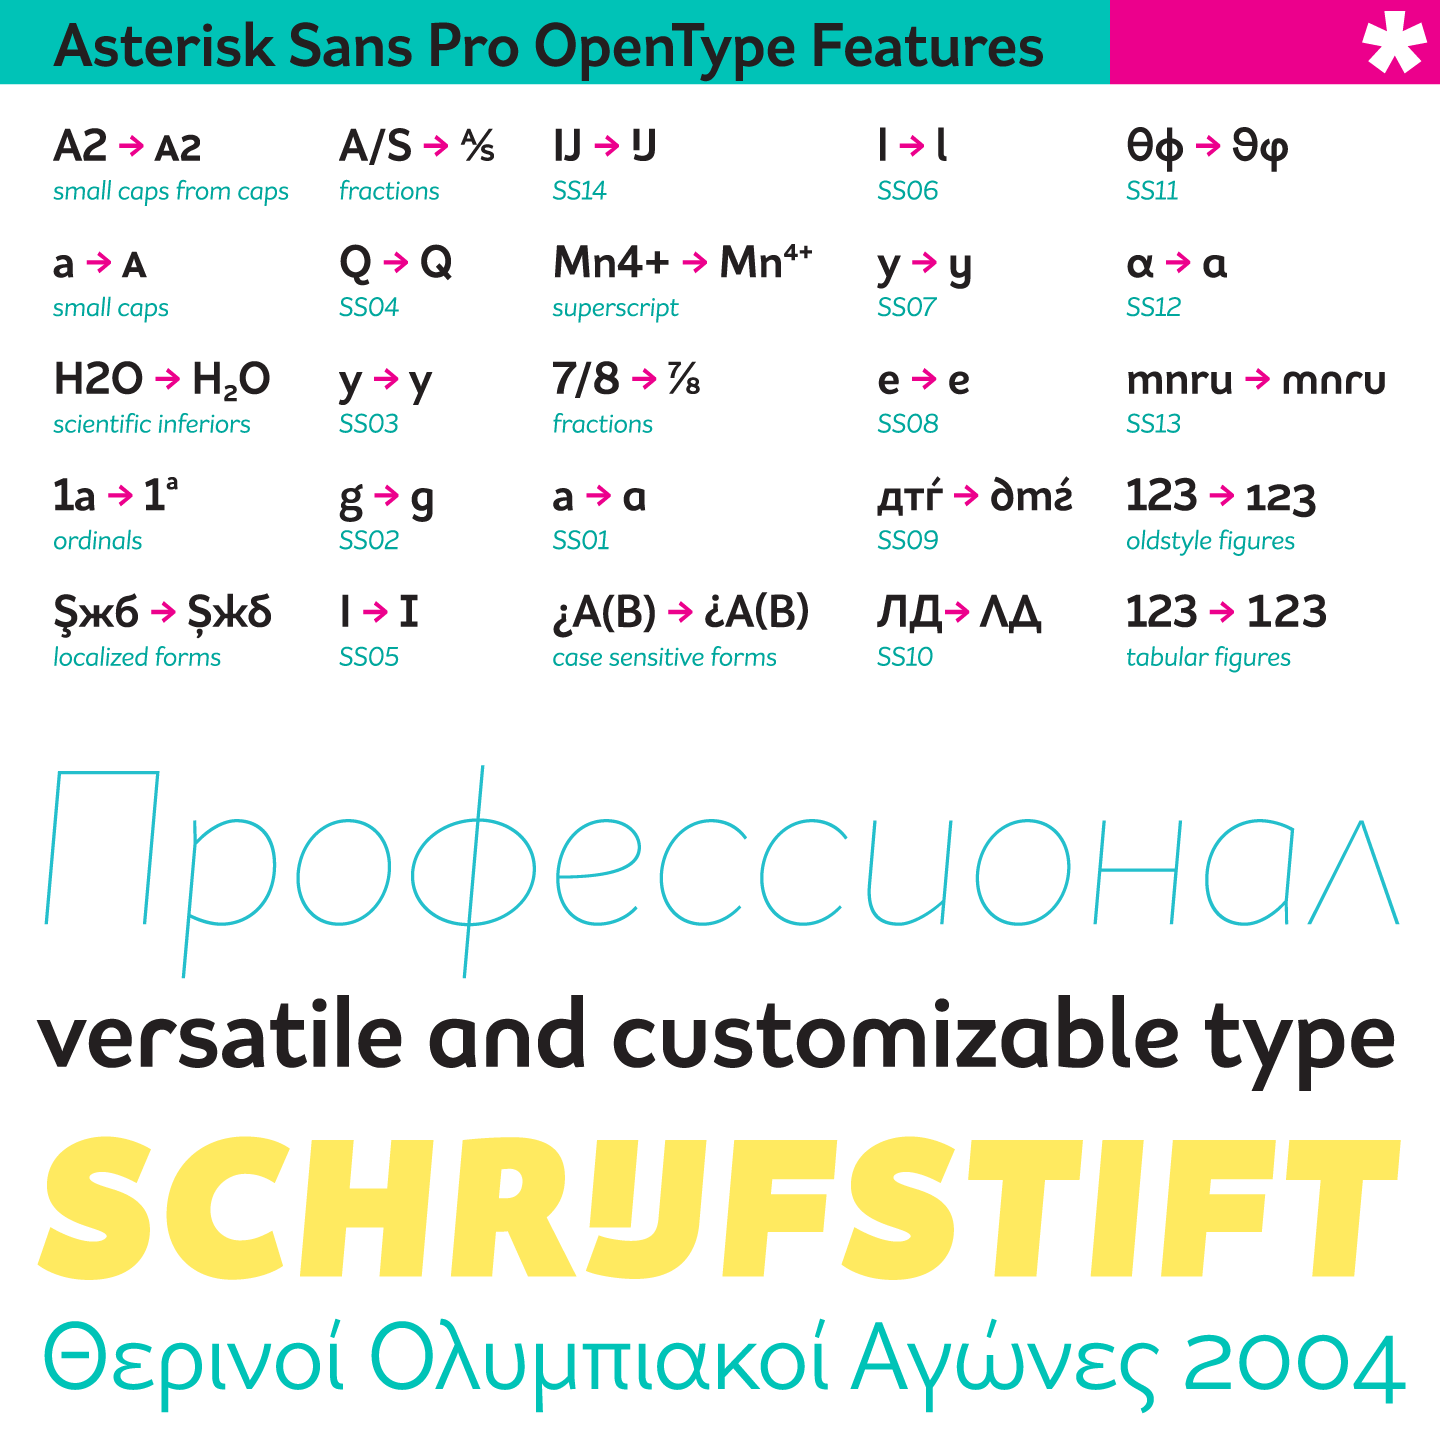 Open Type features and lettering examples in different weights.